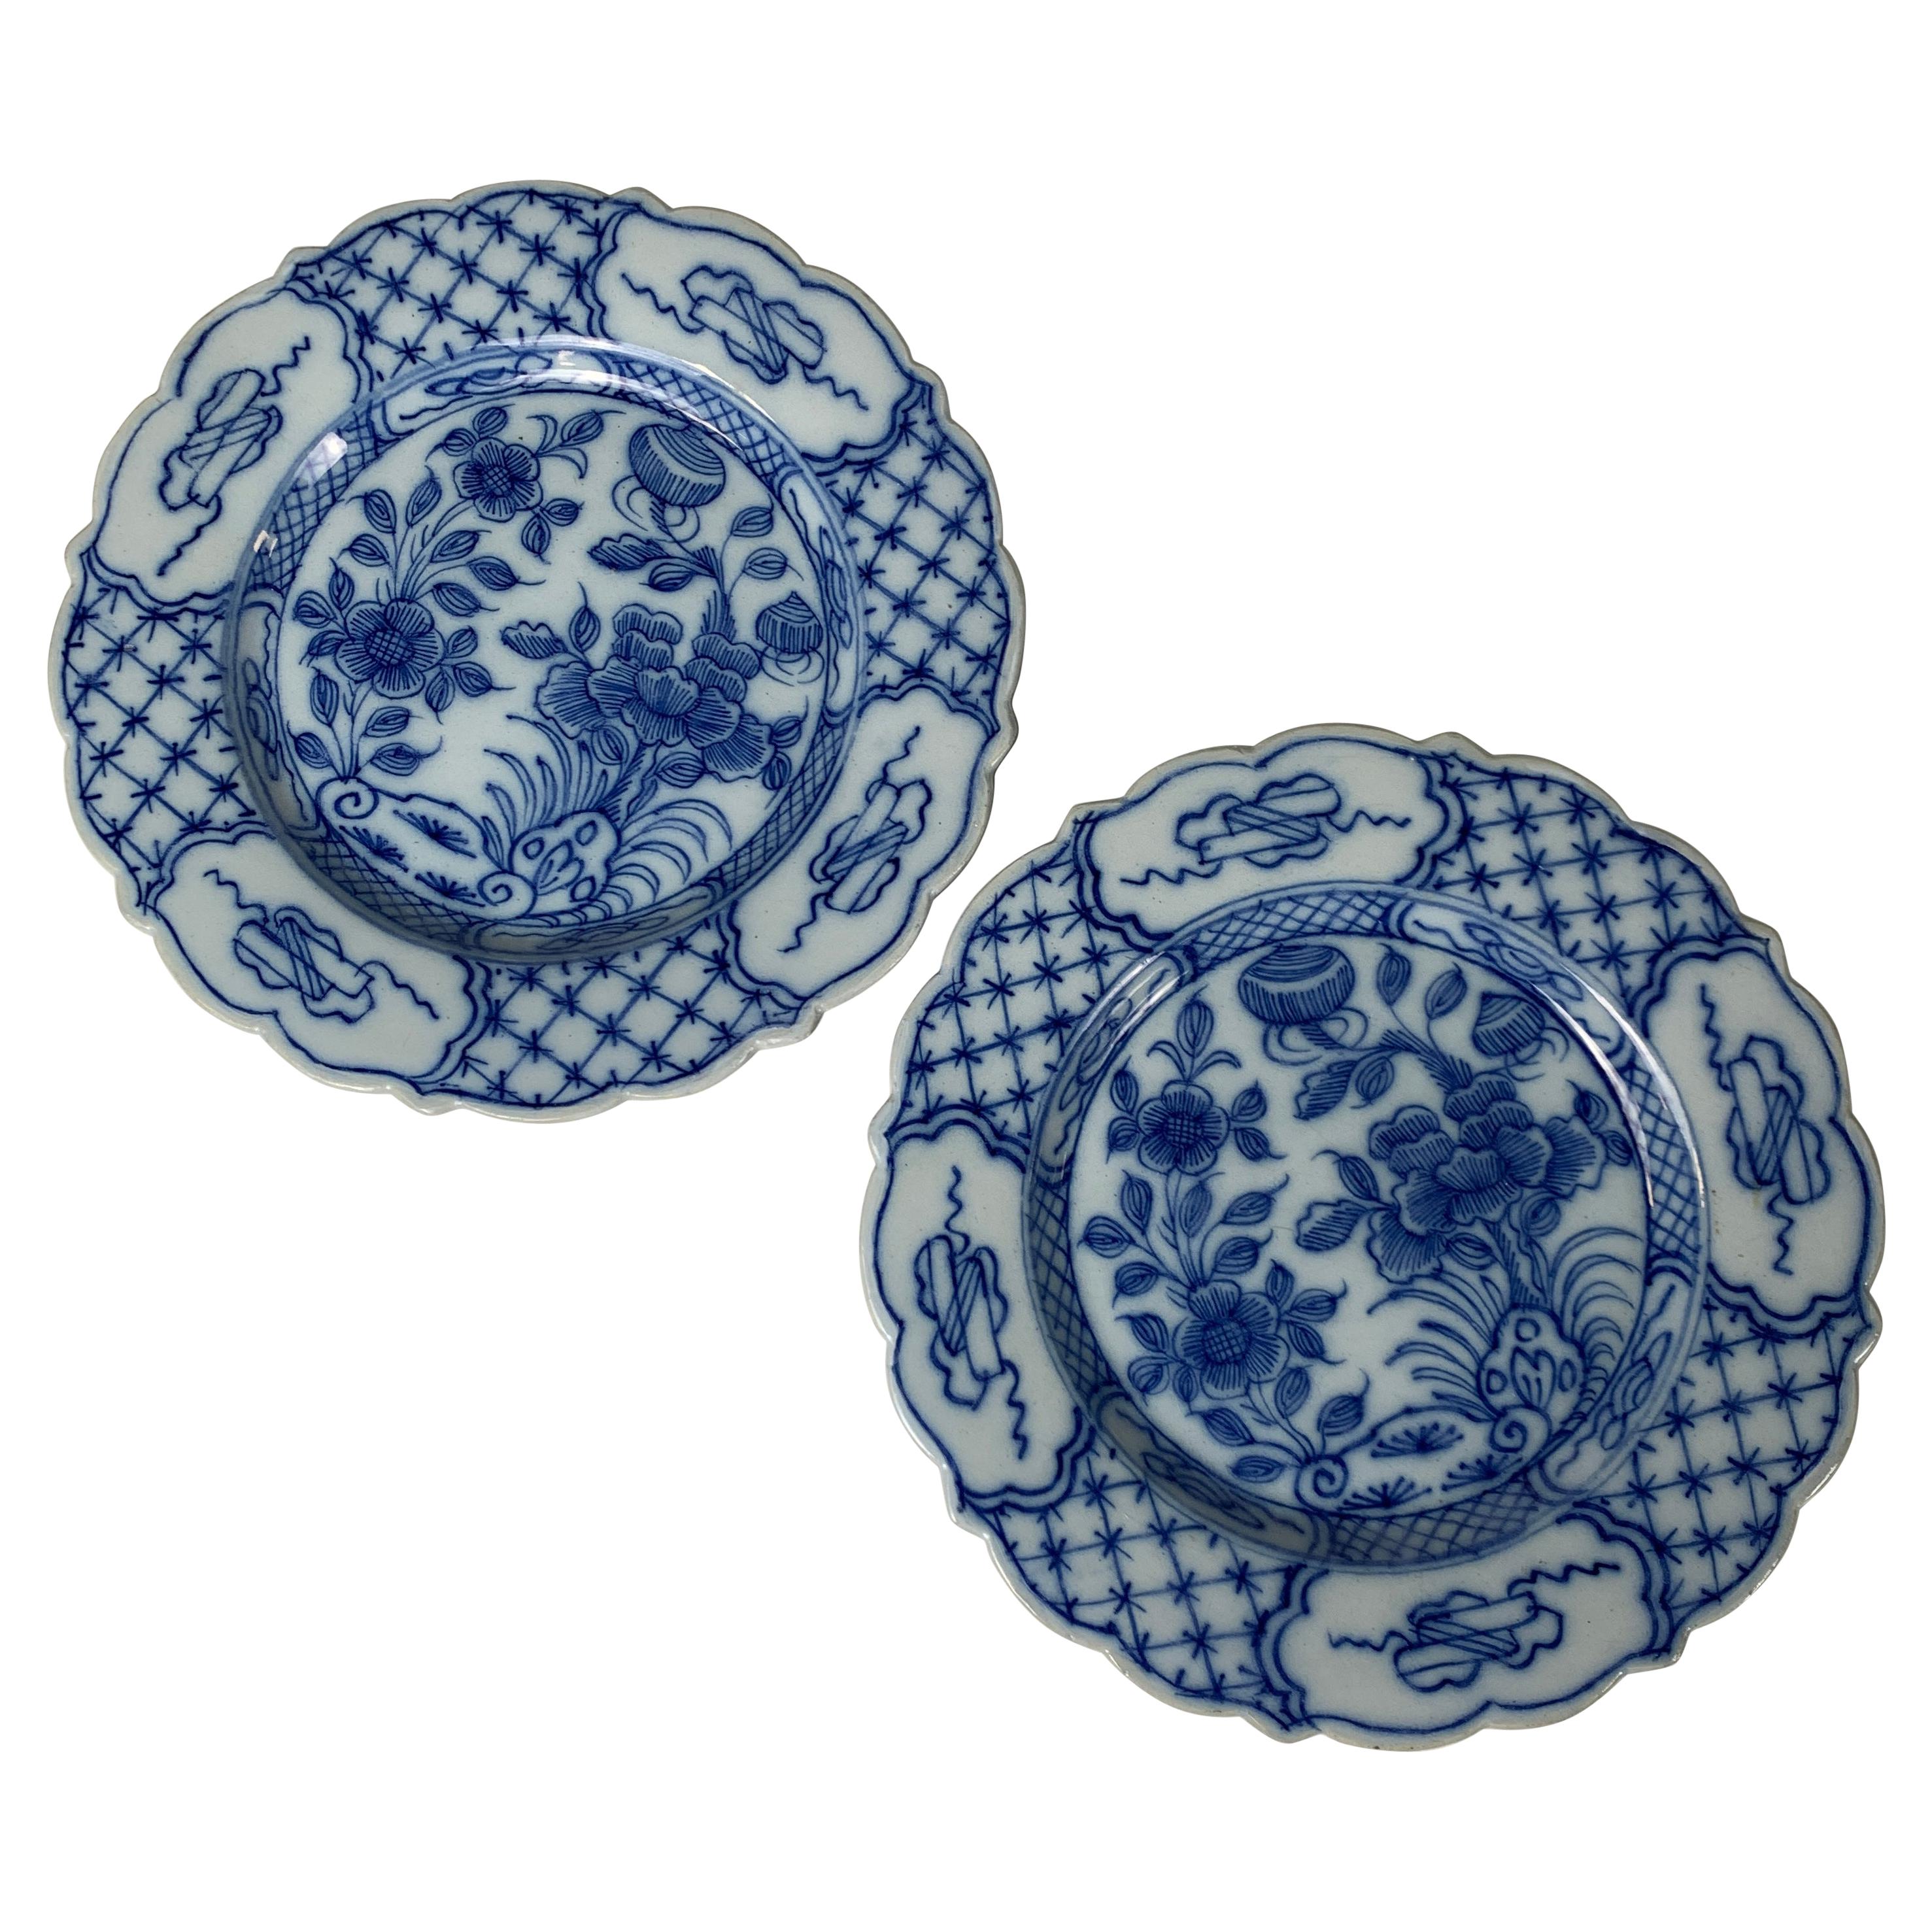 Pair Blue and White Delft Dishes Hand-Painted, Circa 1780